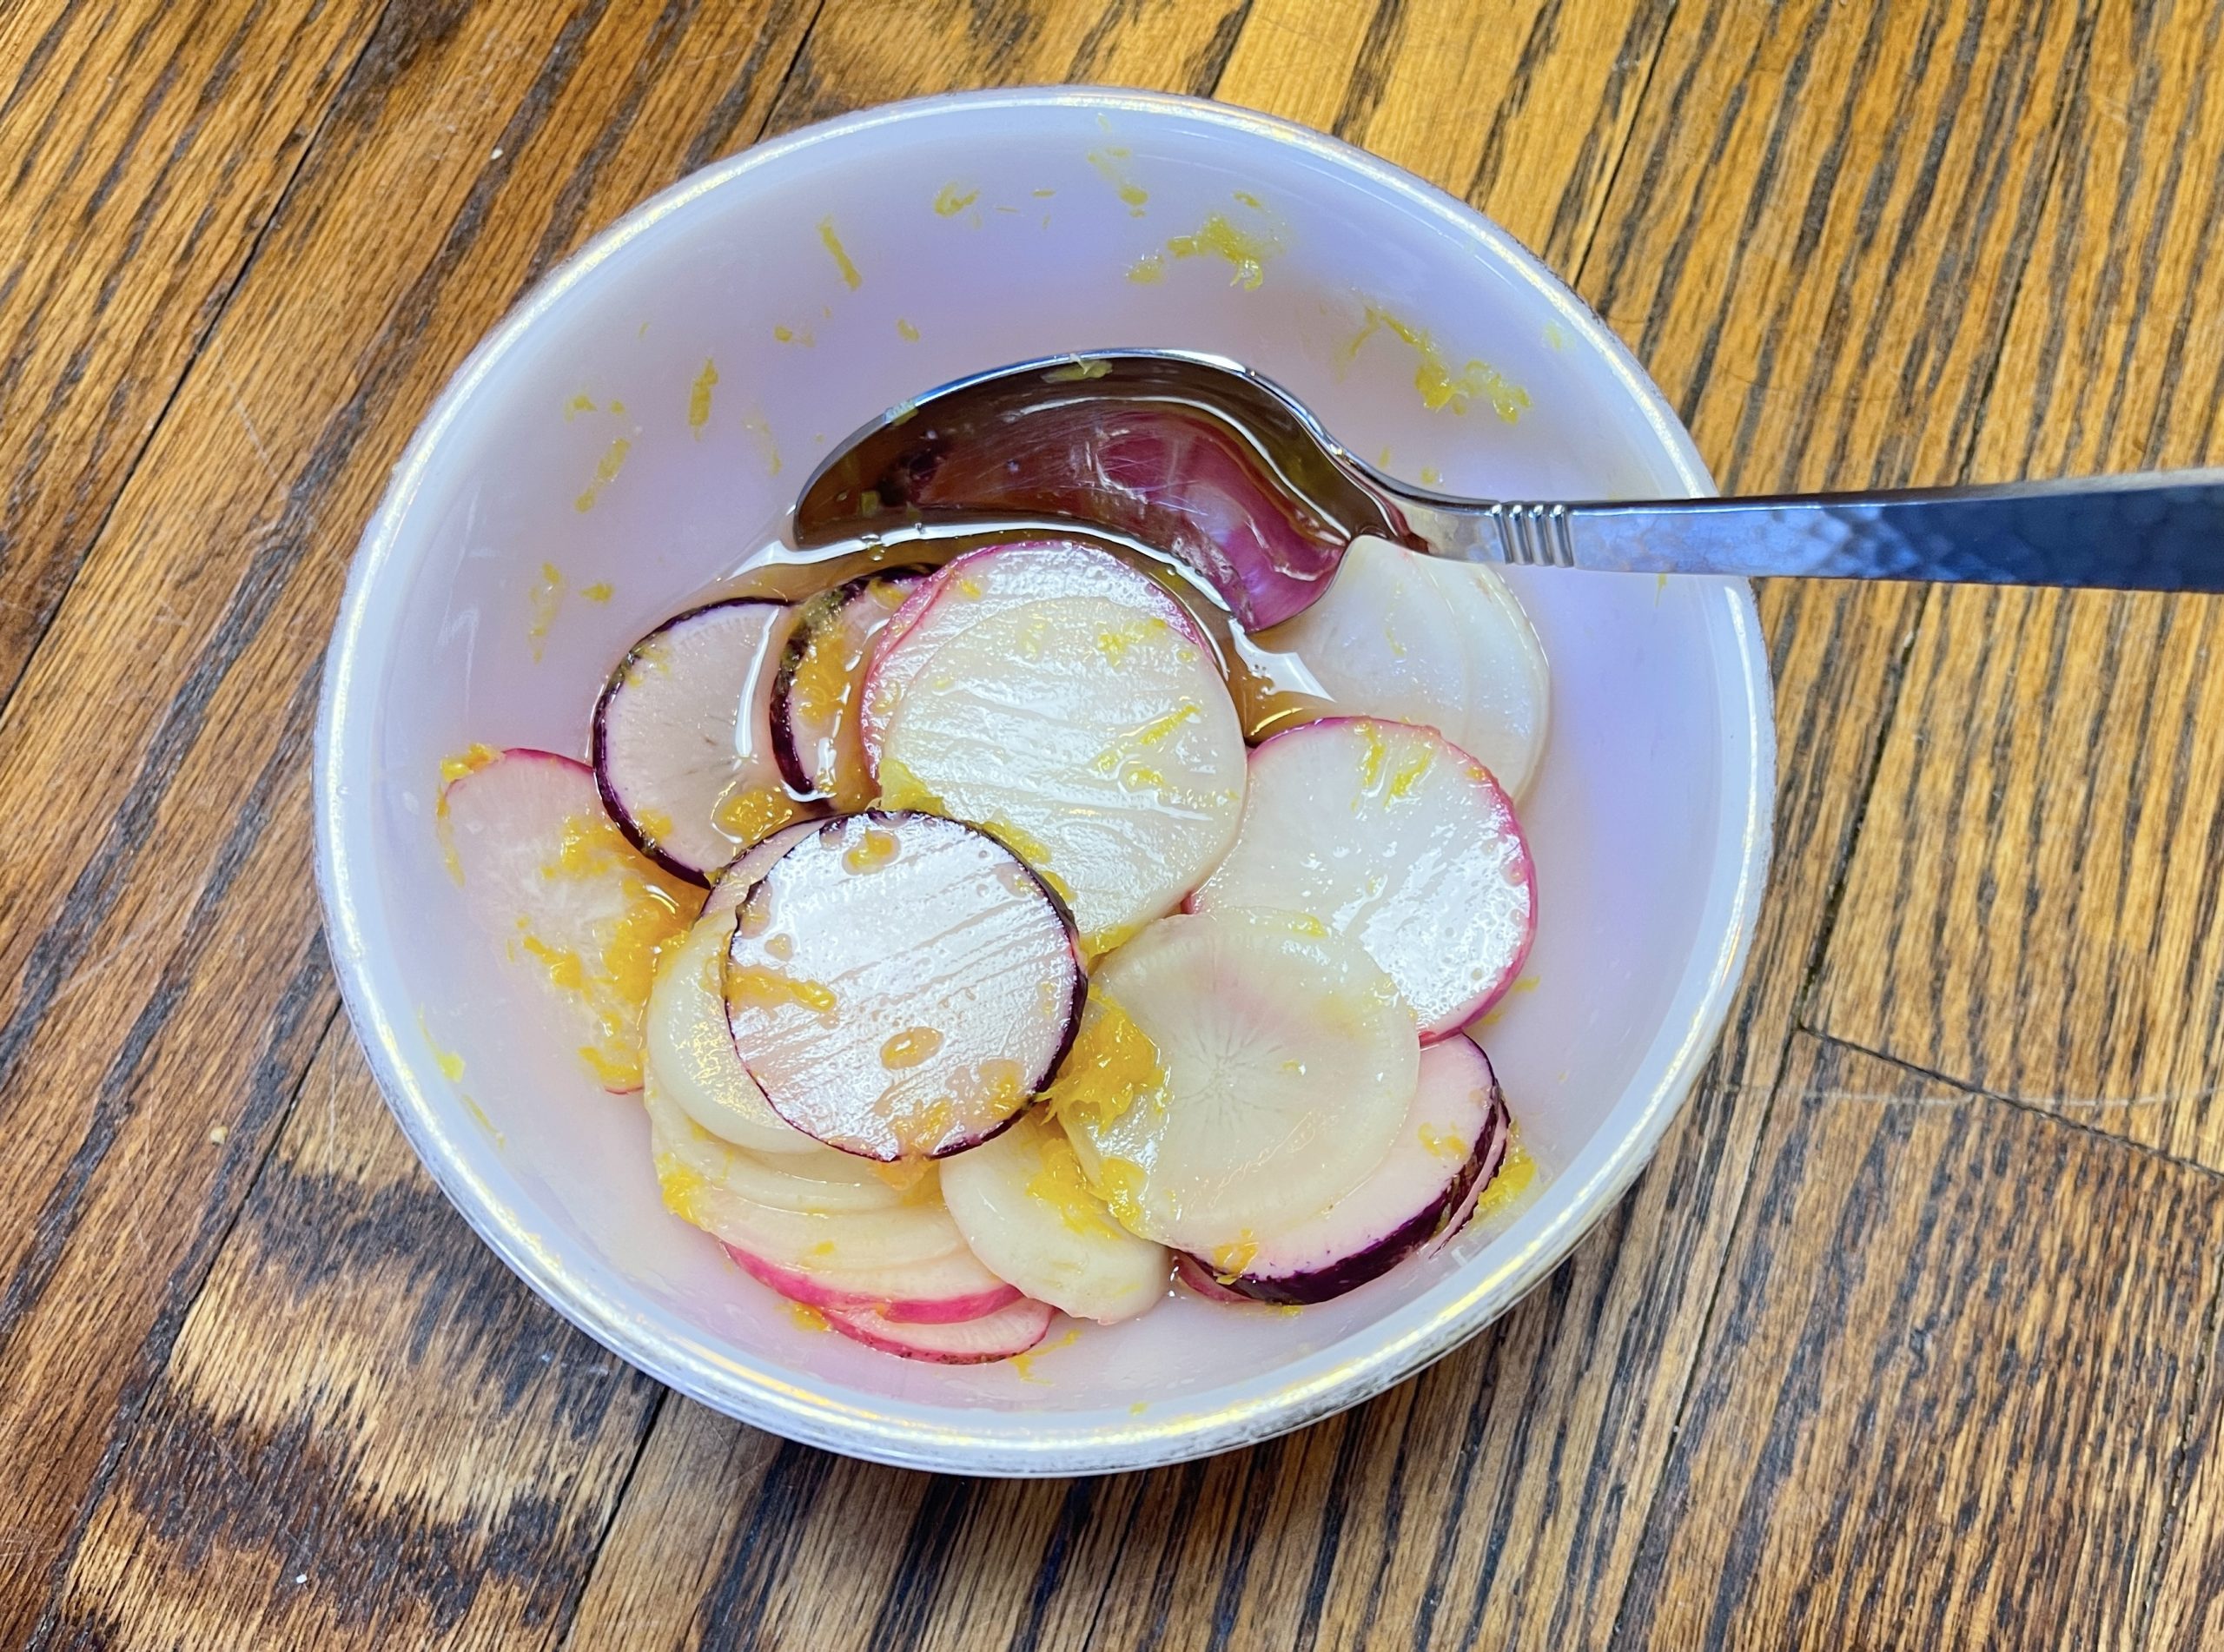 Toss radishes, lemon zest and juice, and salt in a small bowl. Set aside.